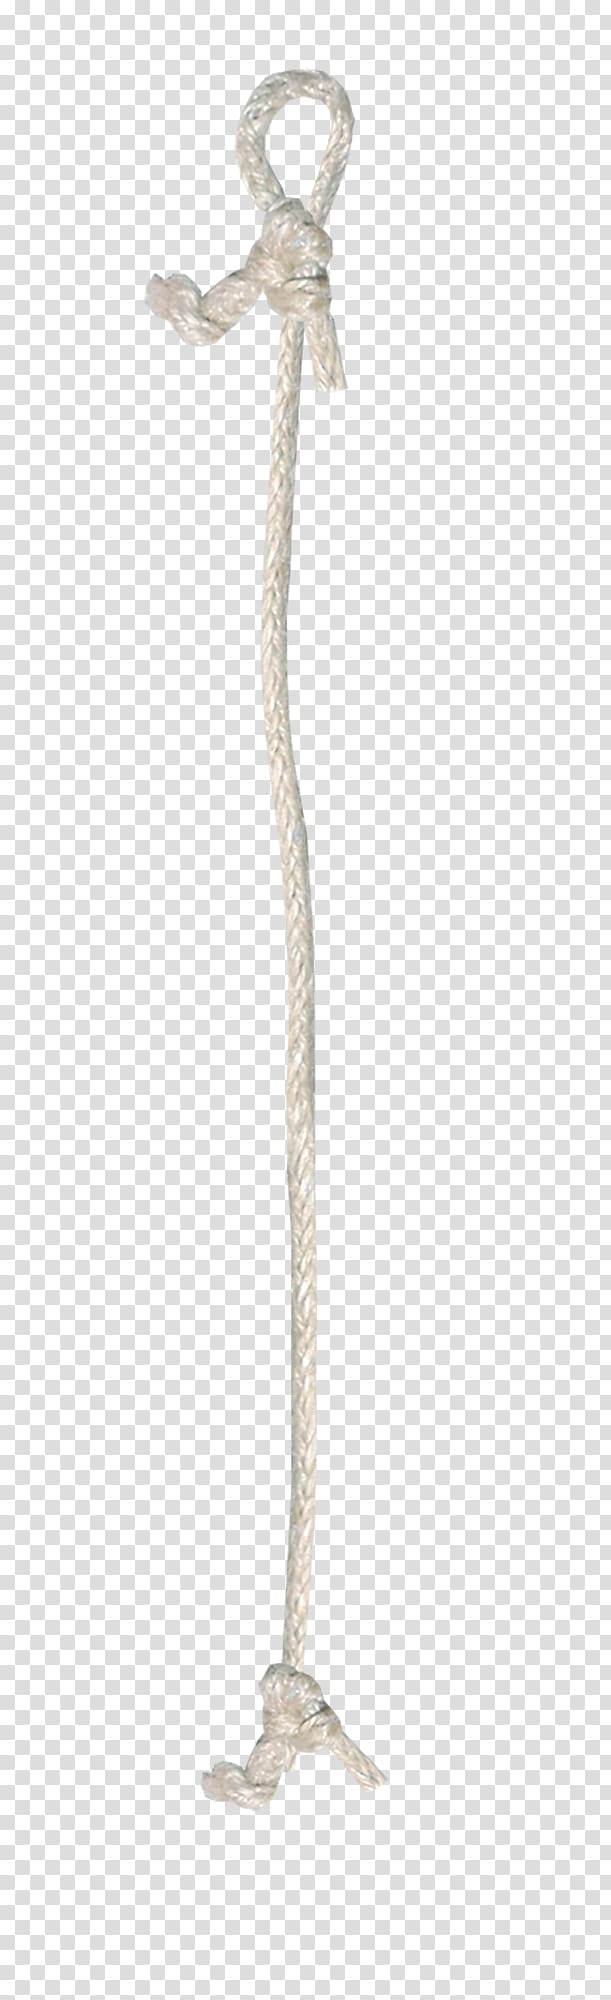 Rope Knot White , Rope material transparent background PNG clipart